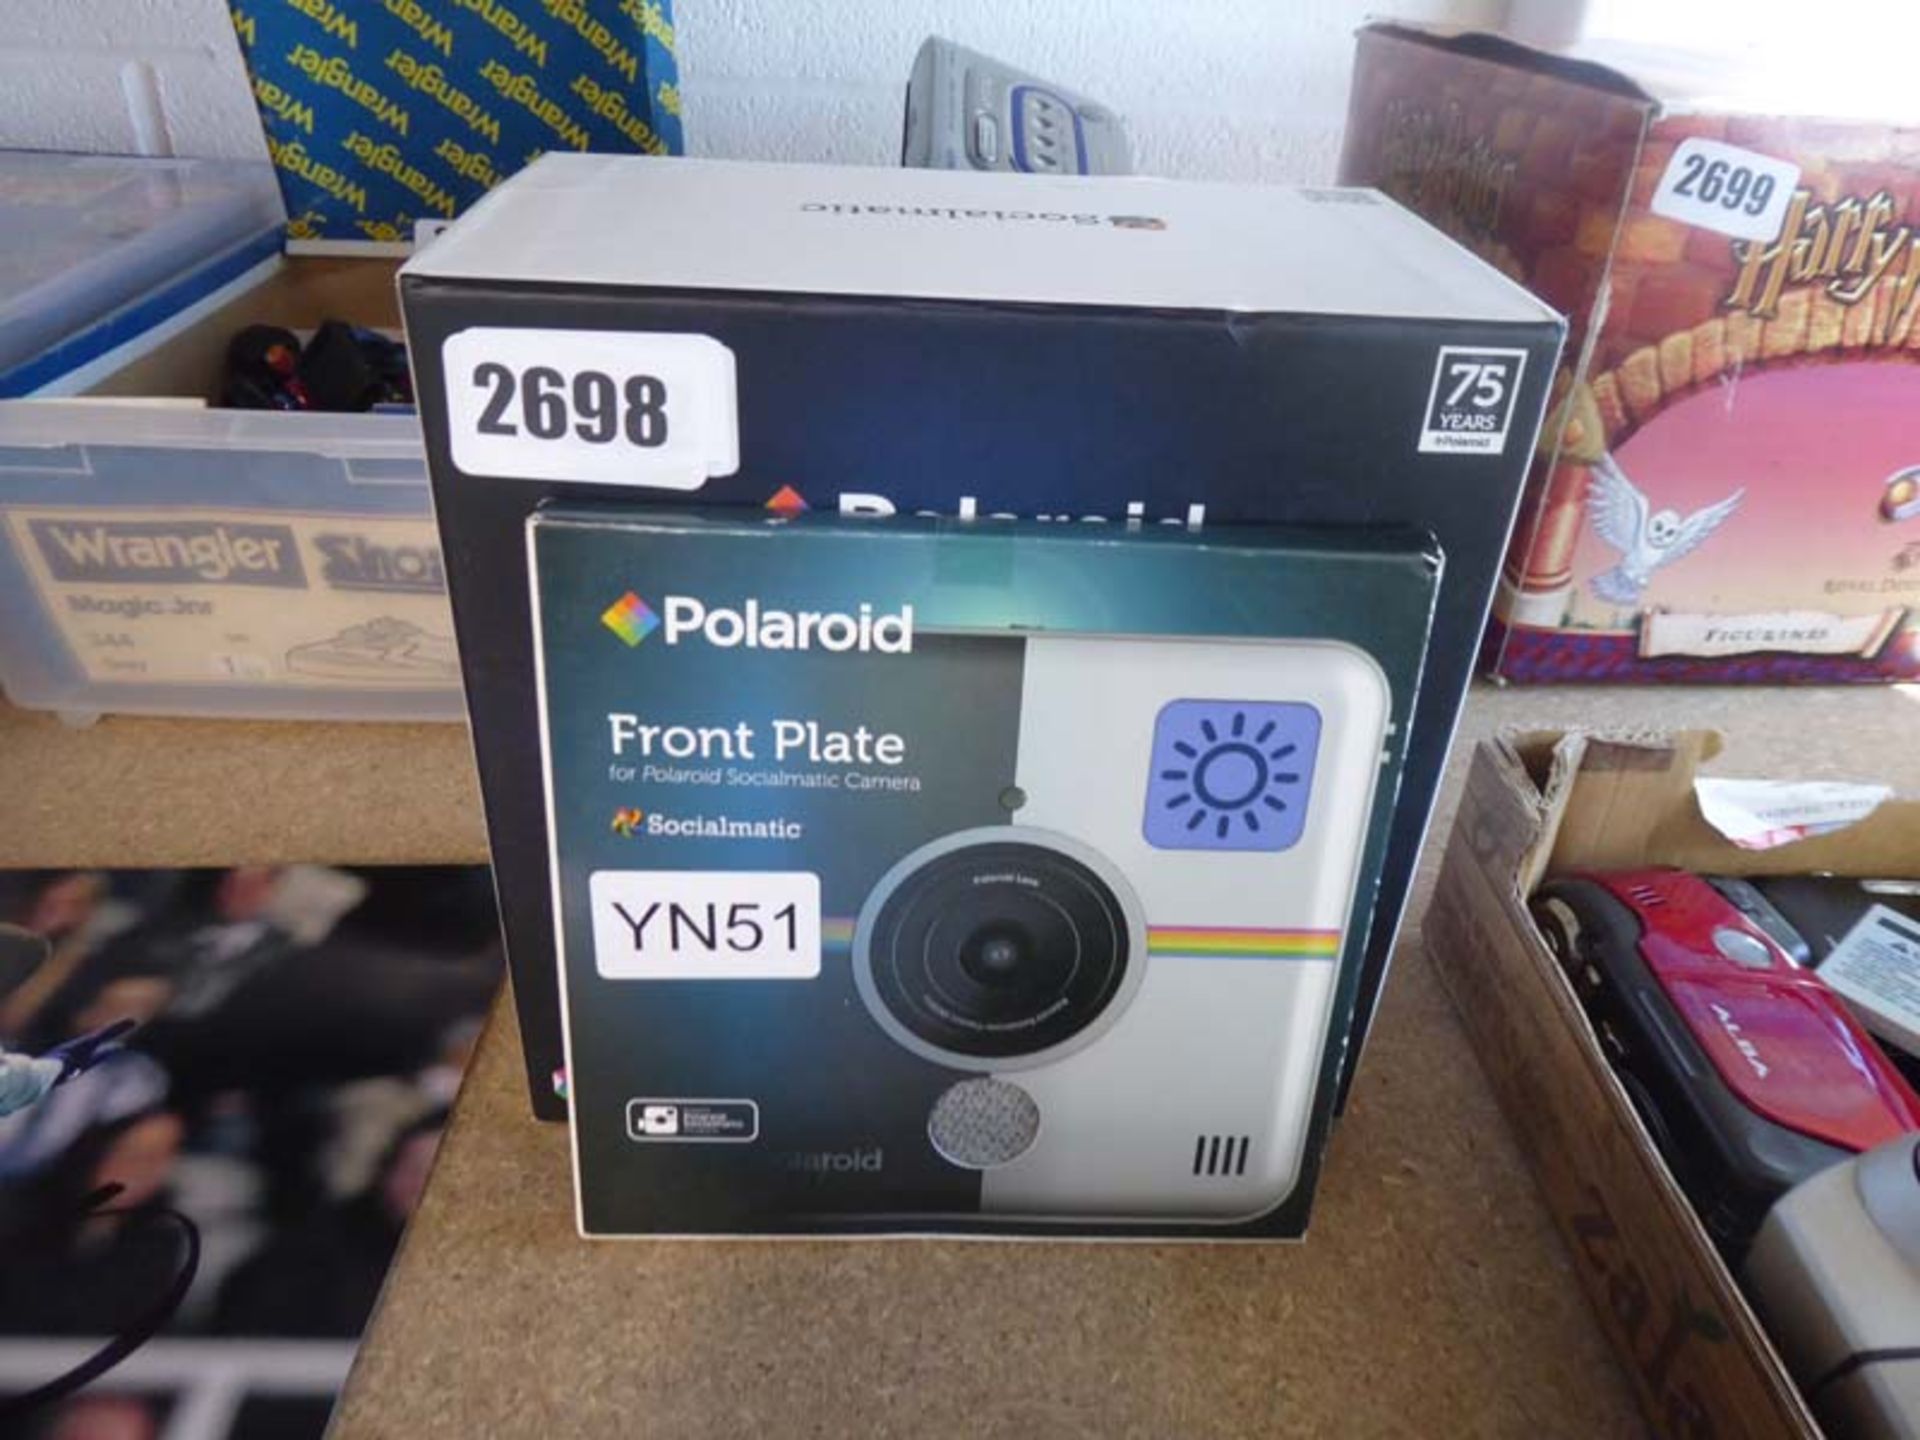 WD 2392 Polaroid SOciomatic camera with front plate accessory